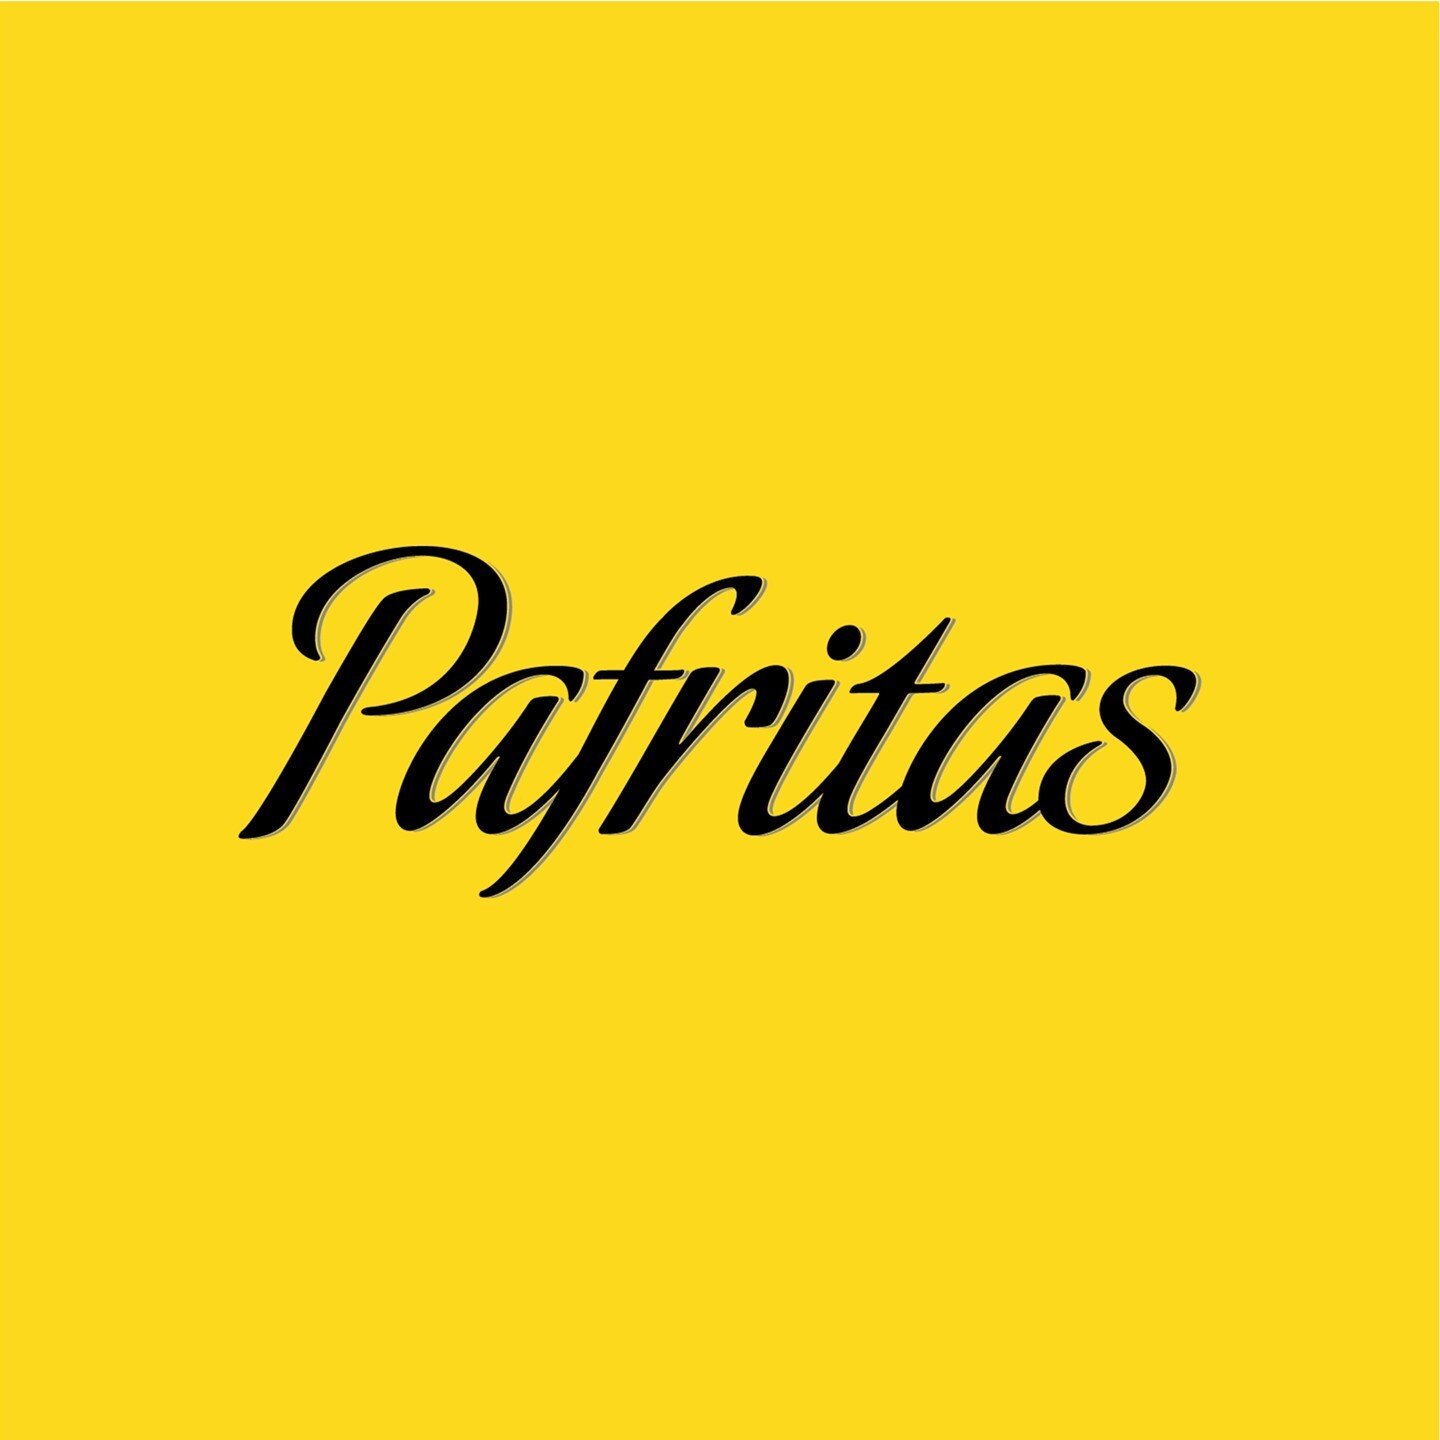 💥 Introducing @pafritas_australia 💥⁠
⁠
We figured it was high time our rad Spanish patatas fritas project 'Pafritas' got it's own instagram page...onwards and upwards! ⁠
⁠
Follow along If you'd like to keep up to date with news and all things Pafri